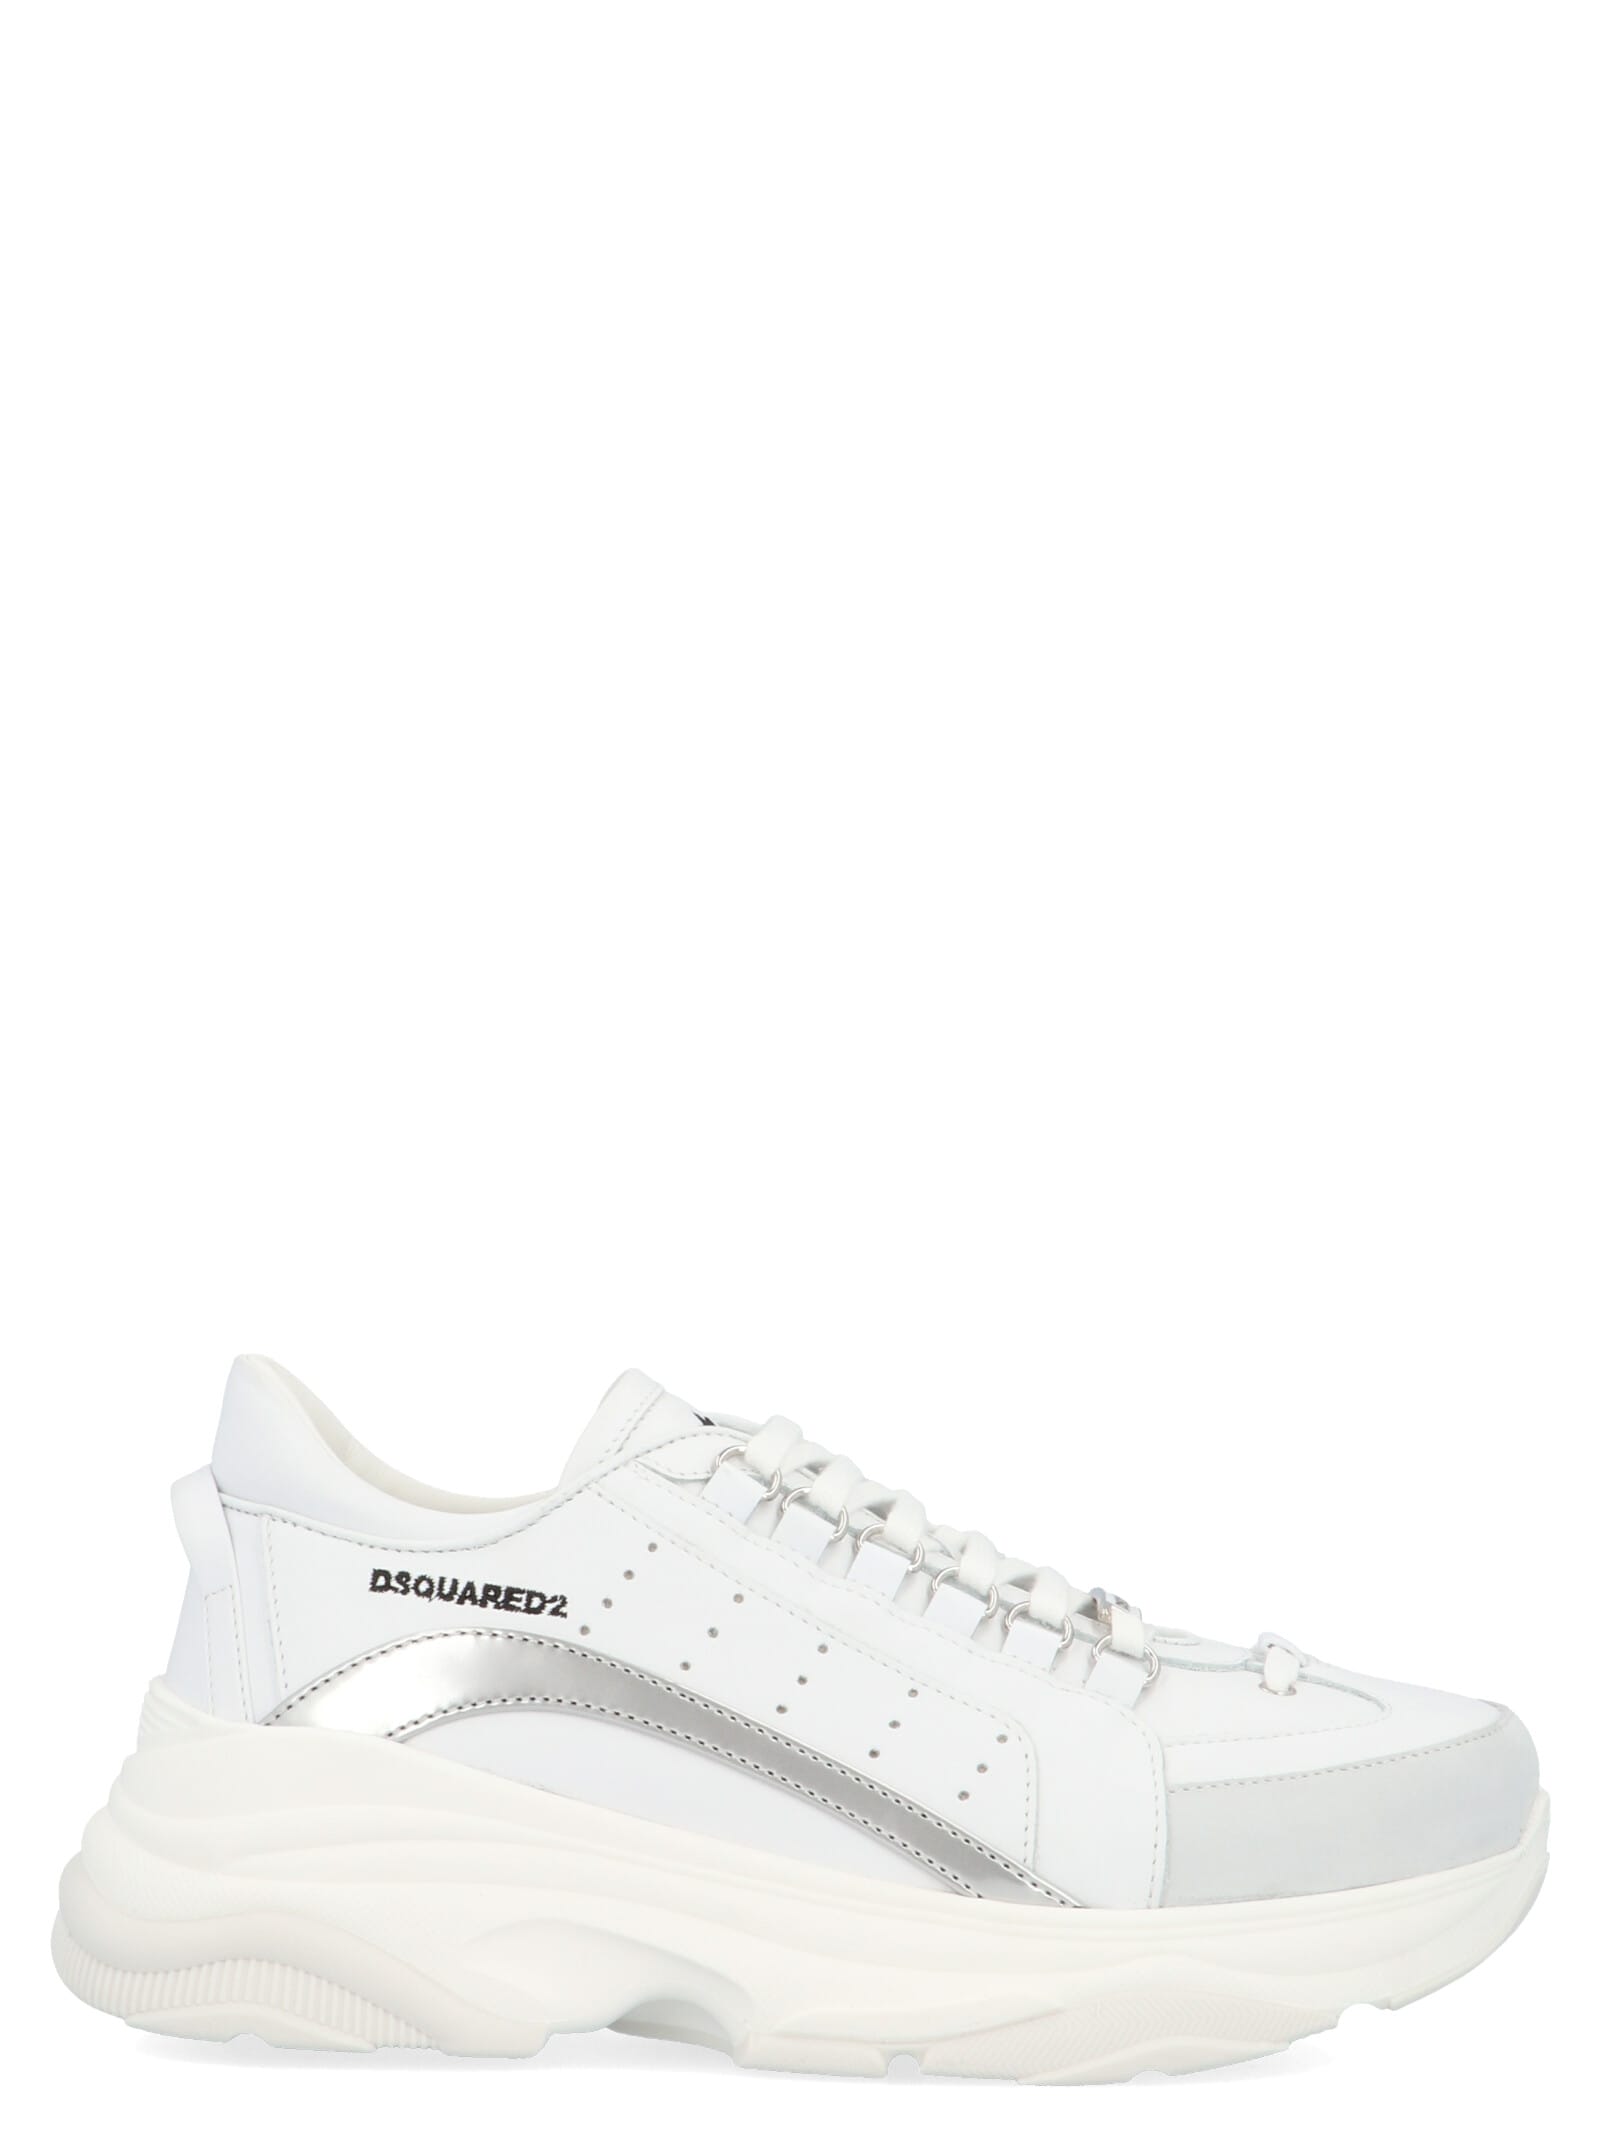 dsquared 551 sneakers sale